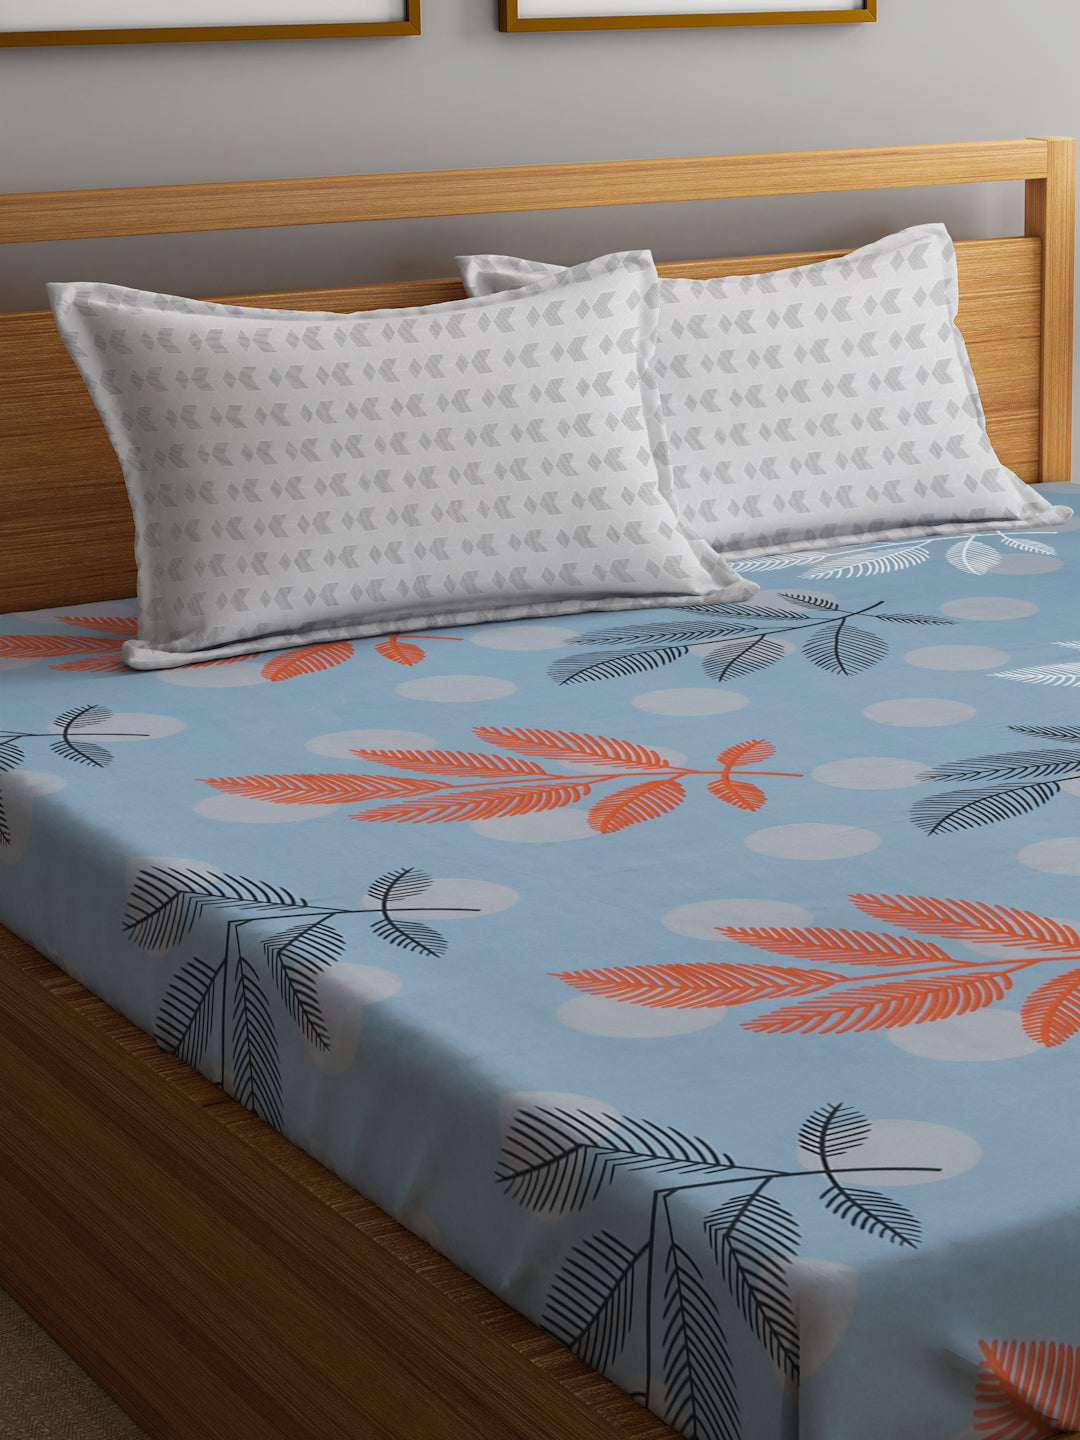 Klotthe Multicolor Floral 300 TC Cotton Blend Fitted Double Bedsheet Set in Book Fold Packing